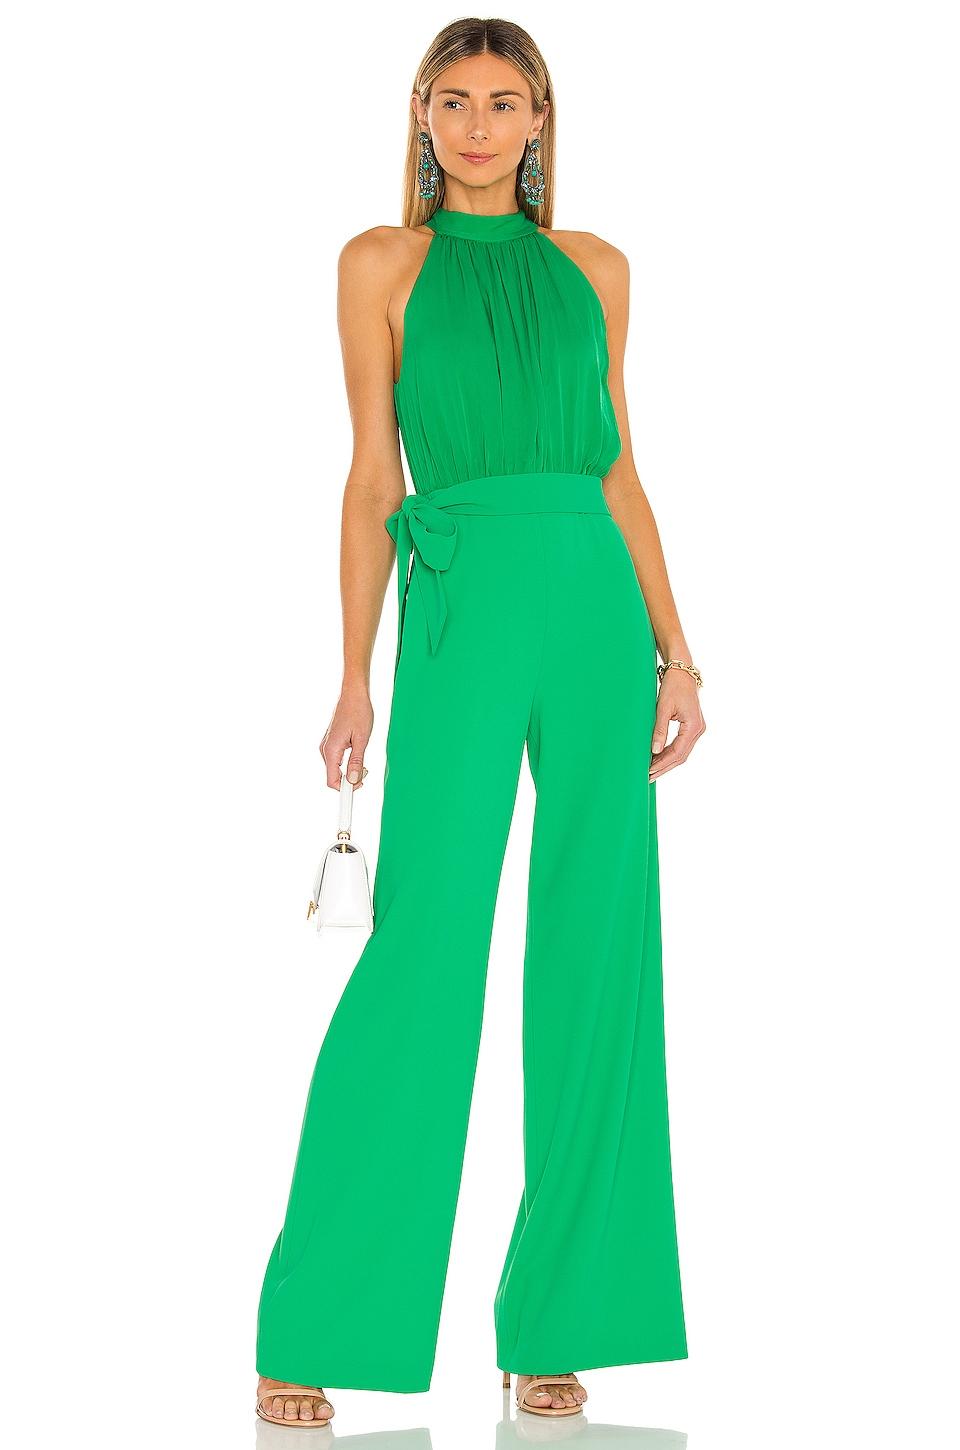 Alice + Olivia Synthetic Thelma Halter Neck Jumpsuit in Green - Lyst